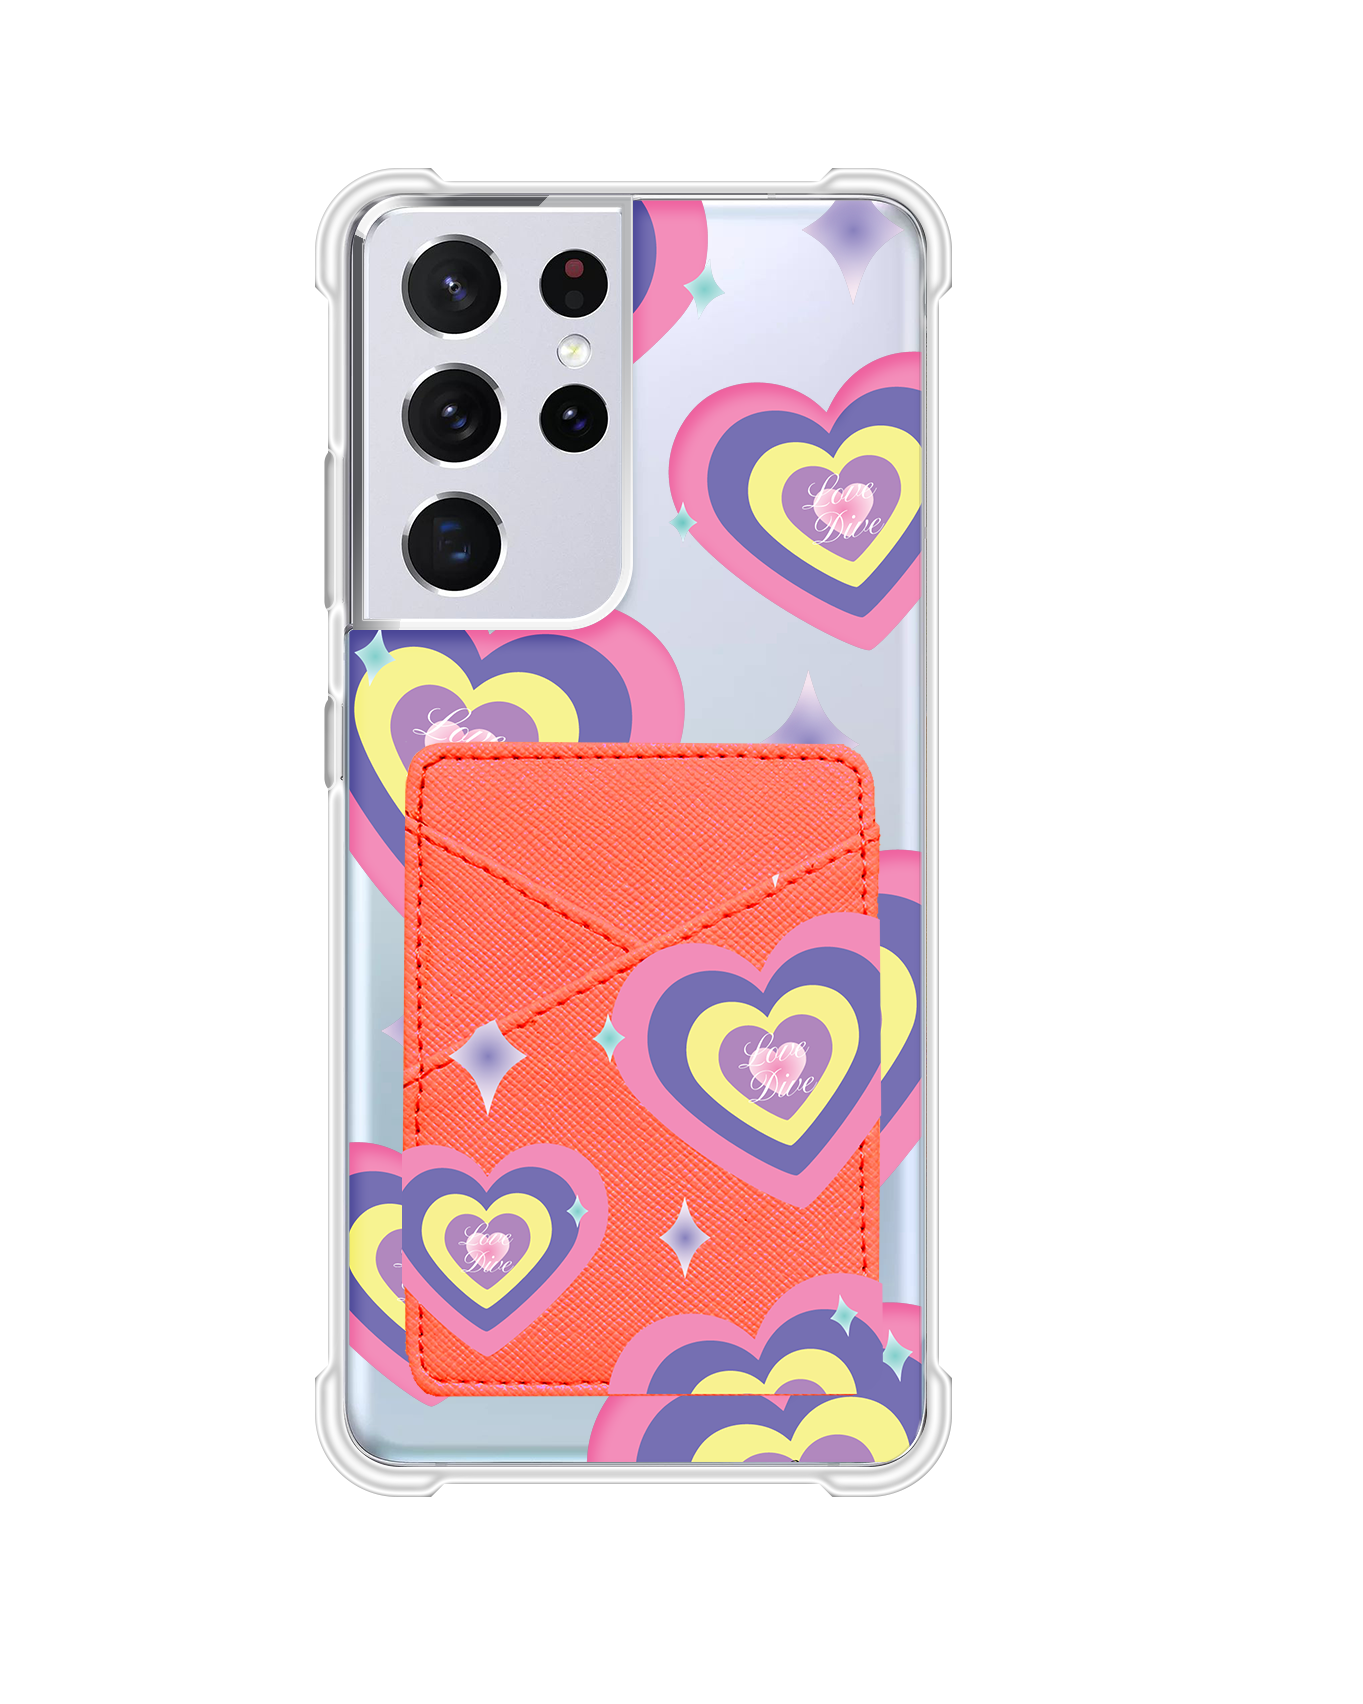 Android Phone Wallet Case - IVE Love Dive